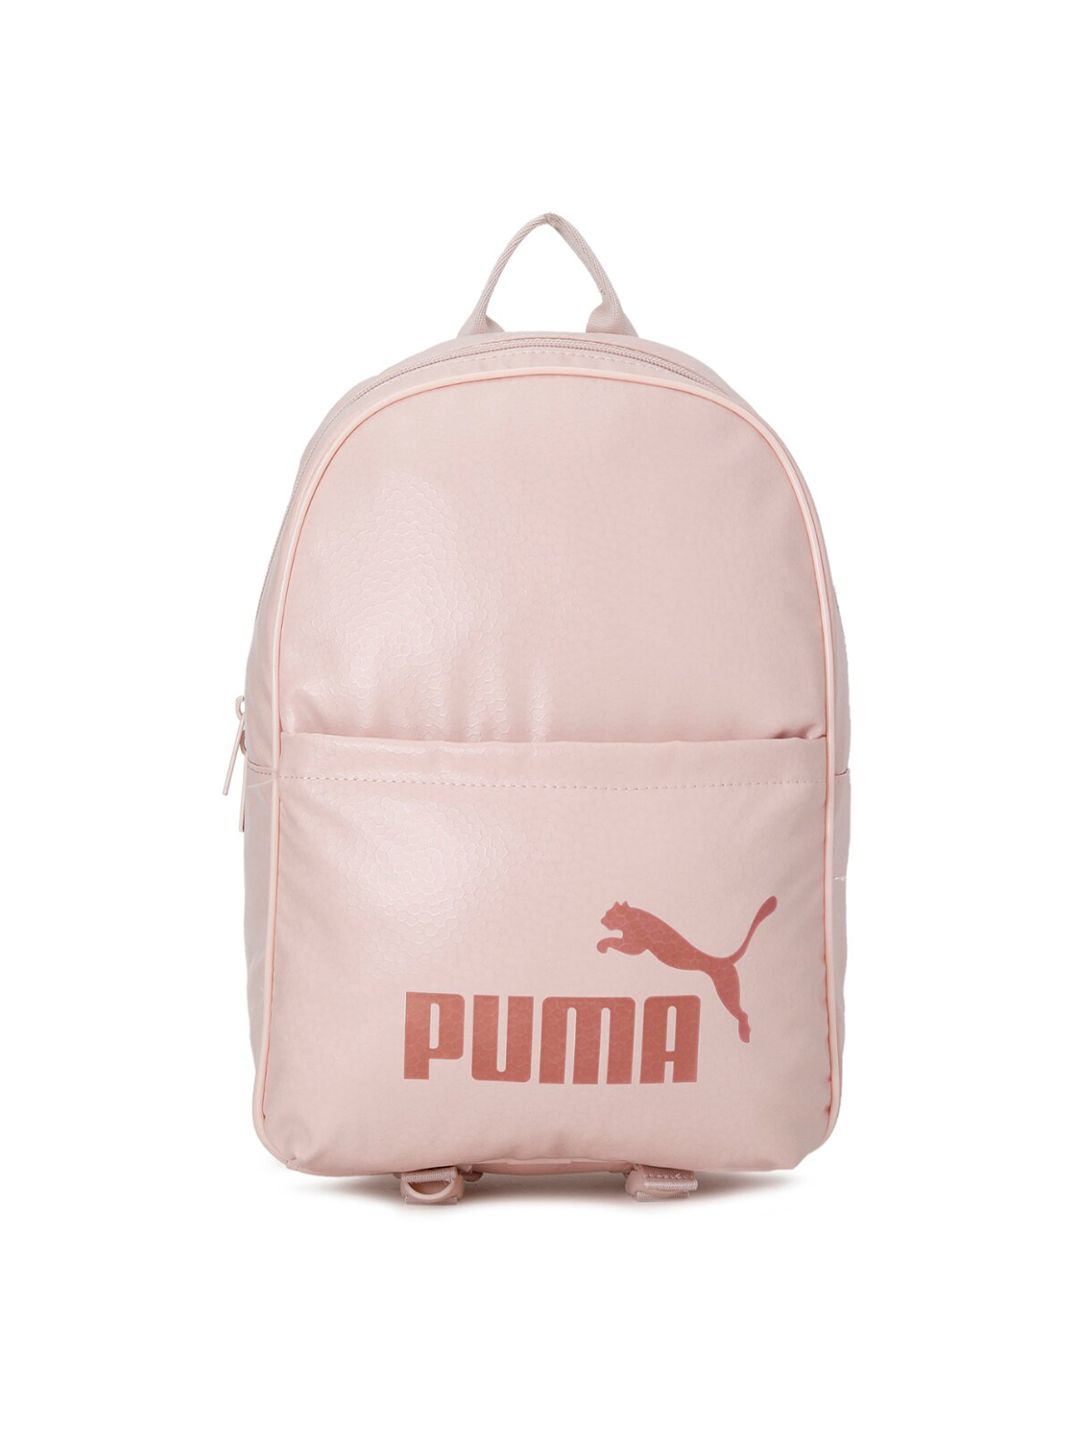 Puma Women Pink Backpack Price in India